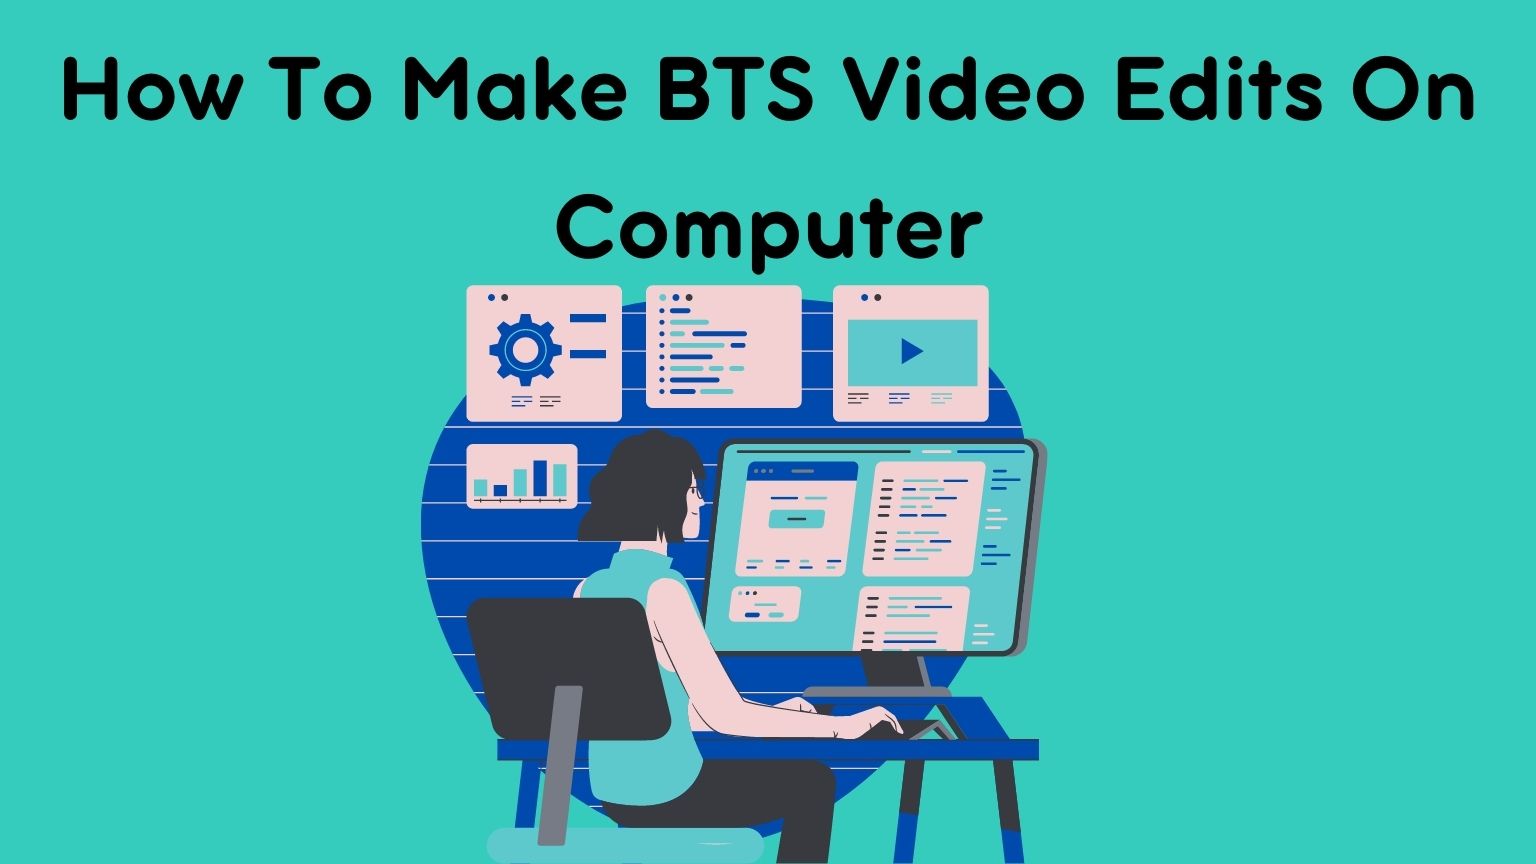 How To Make BTS(Behind-the-scenes) Video Edits On Computer